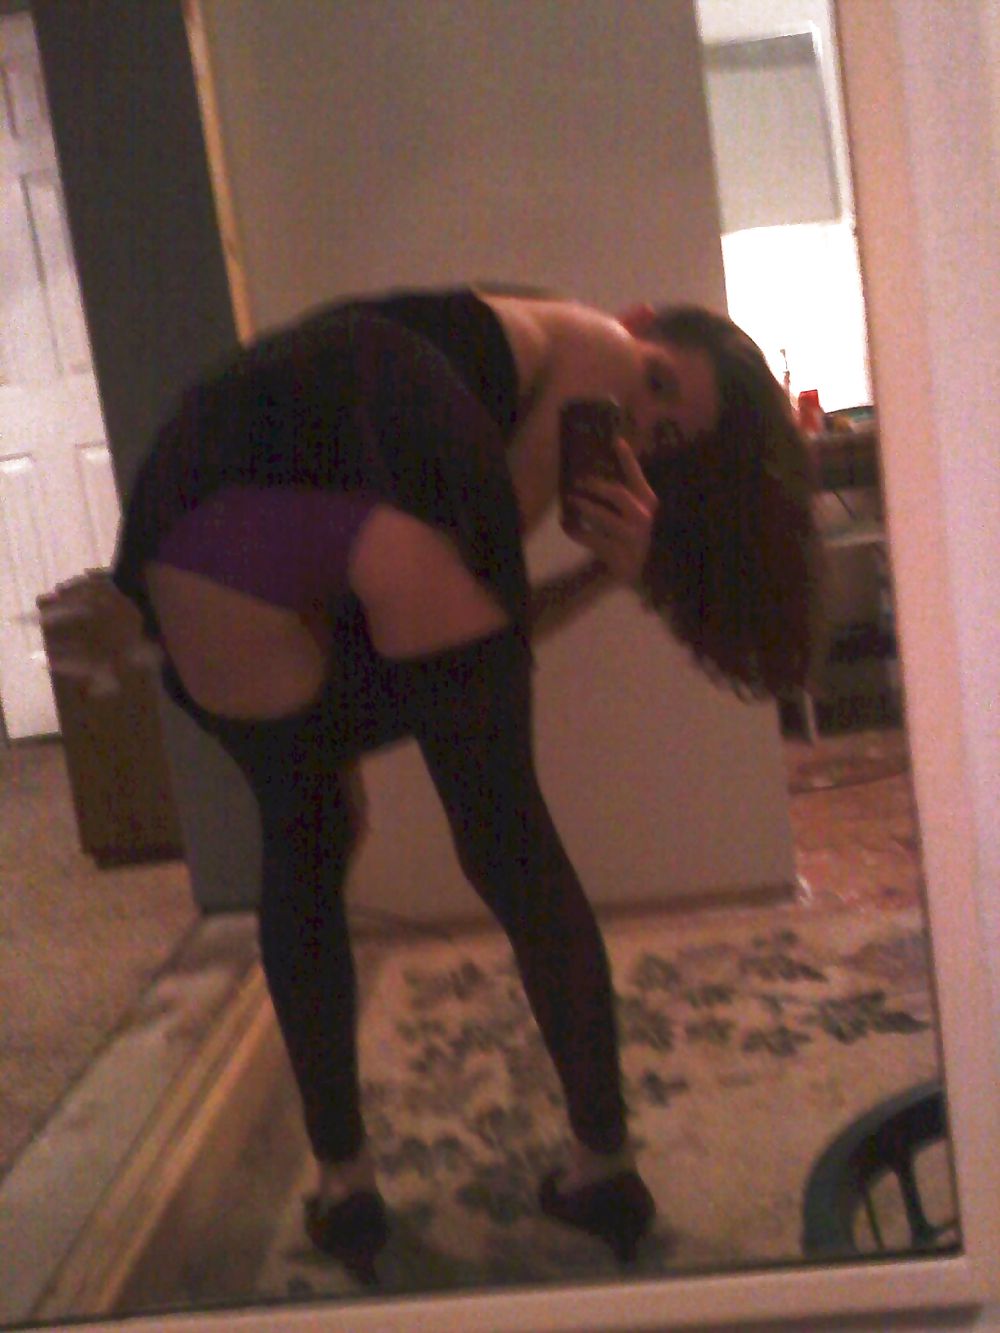 Home from porn store New vibrater and new tights! :) #12194940